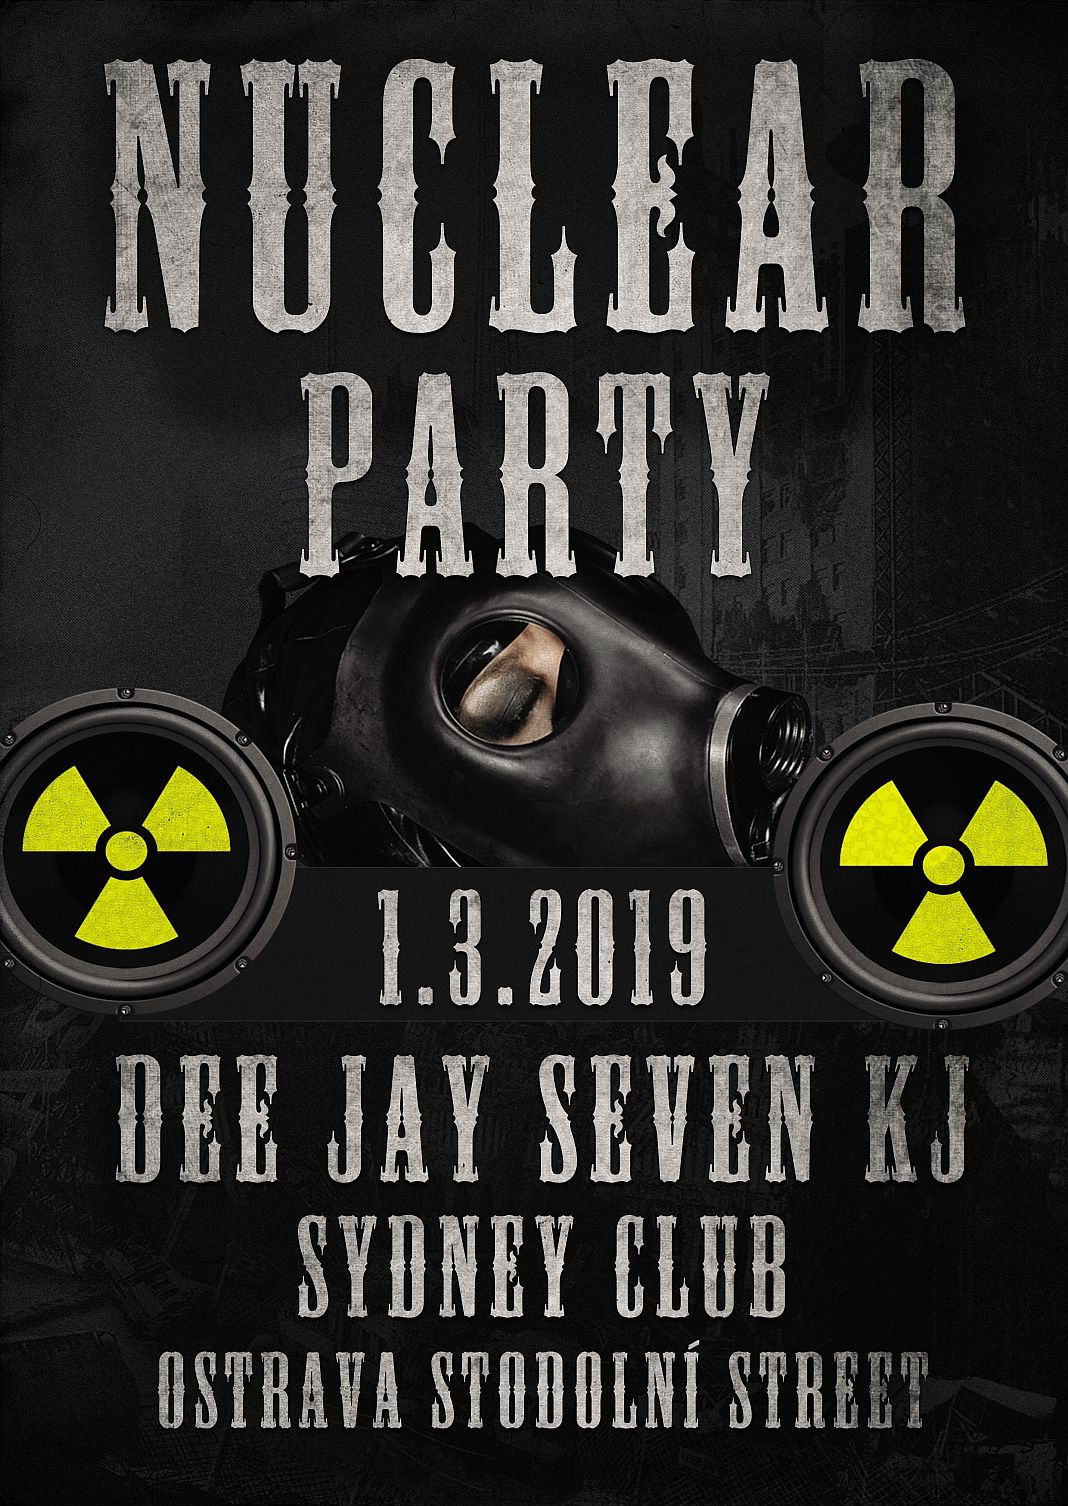 Dj na Nuclear party